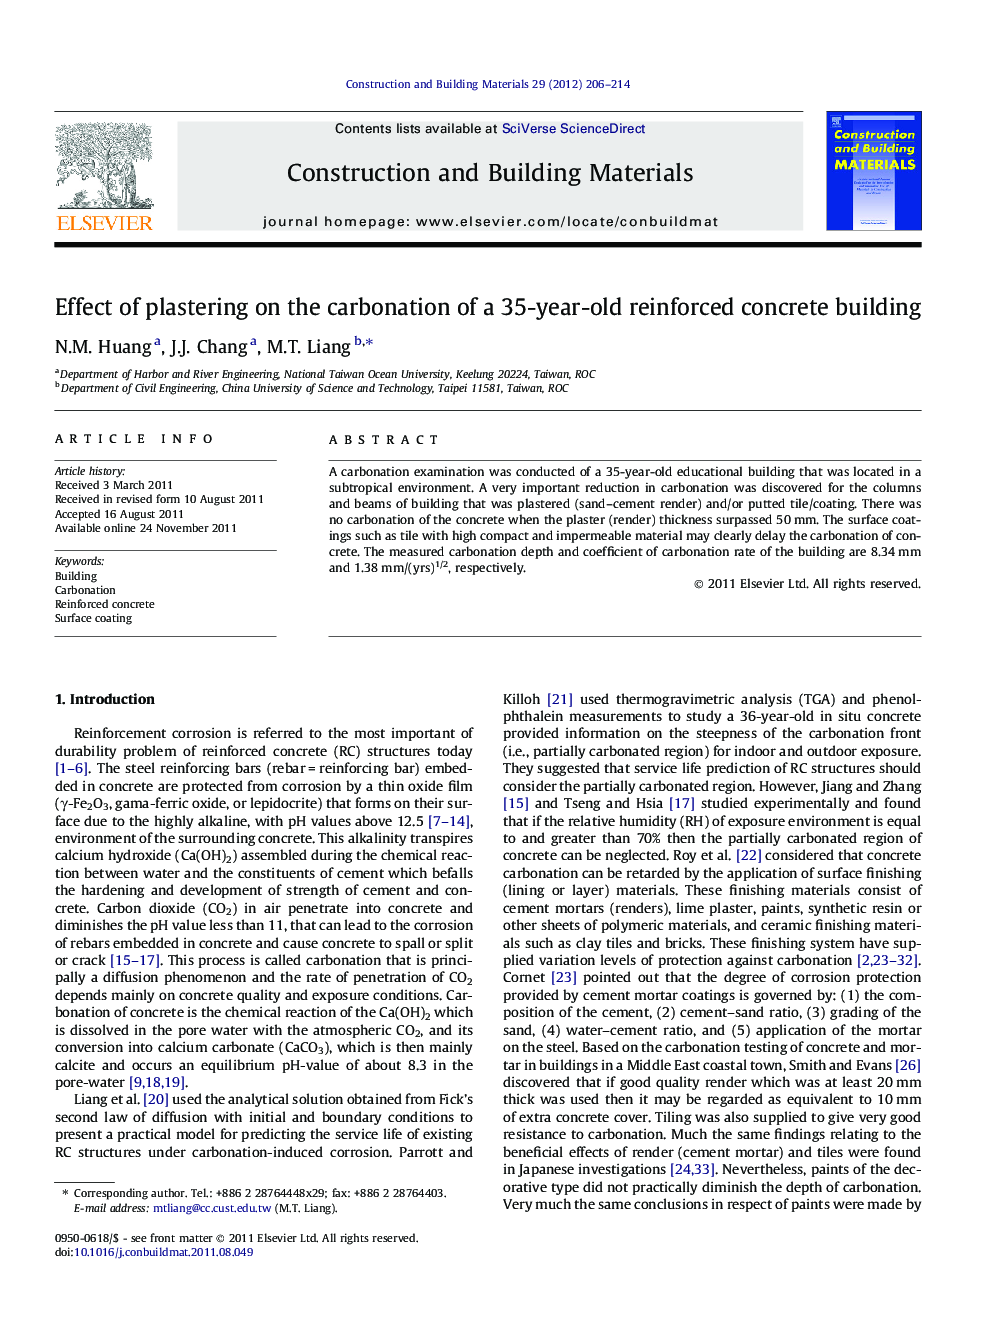 Effect of plastering on the carbonation of a 35-year-old reinforced concrete building